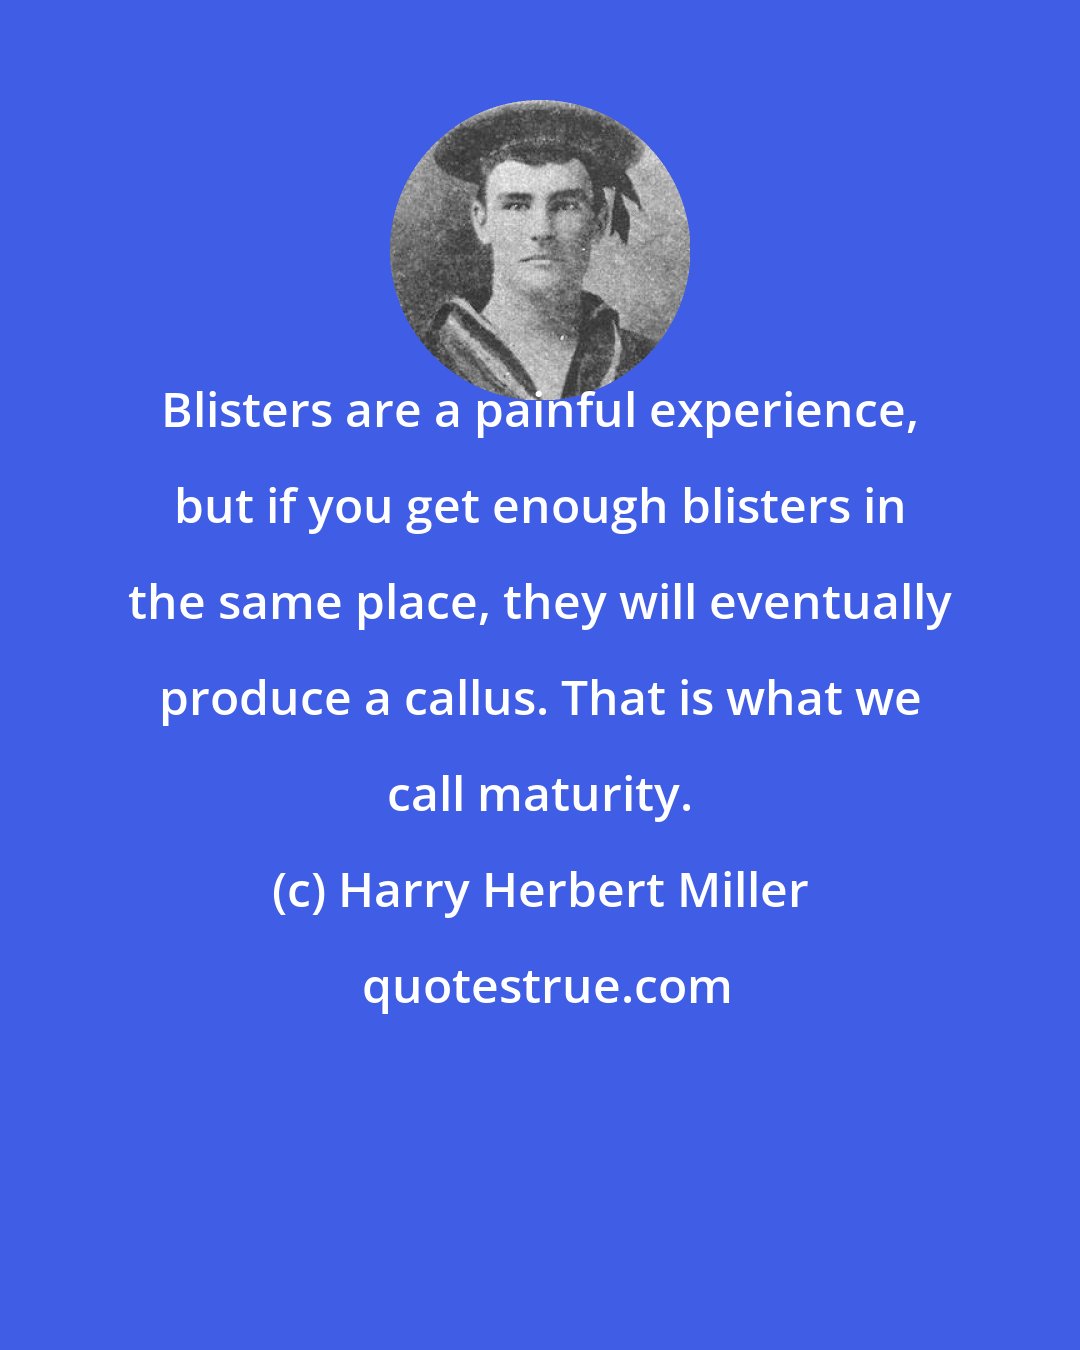 Harry Herbert Miller: Blisters are a painful experience, but if you get enough blisters in the same place, they will eventually produce a callus. That is what we call maturity.